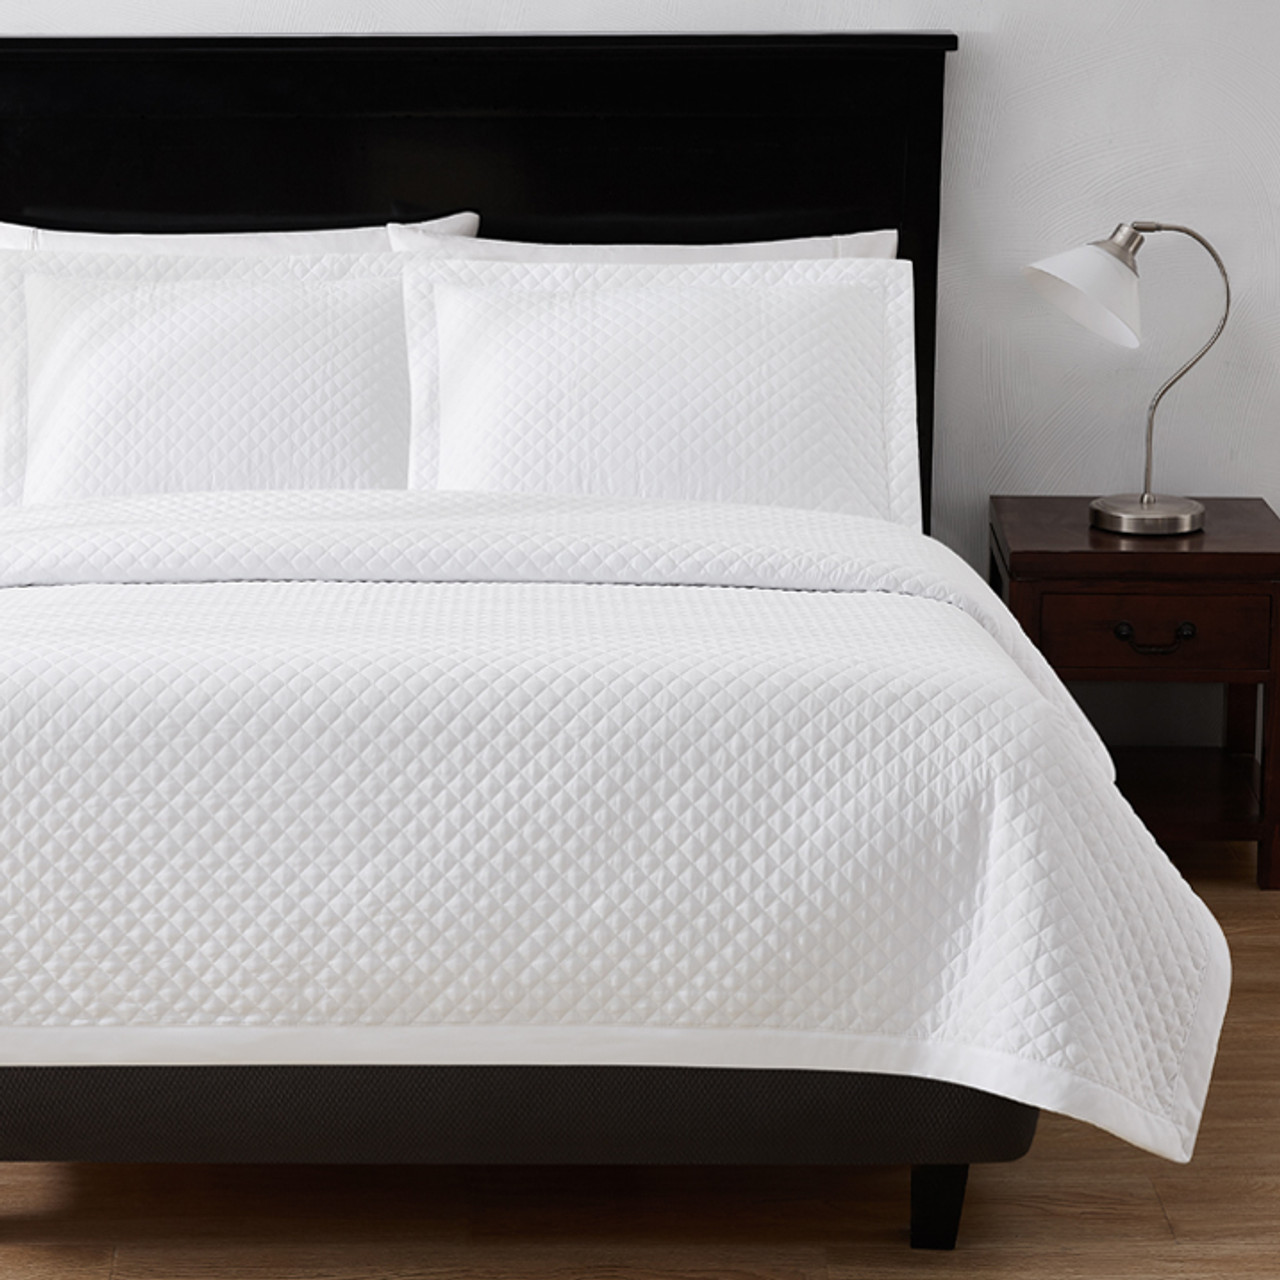 Radiance White Diamond Quilt on bed with dark wooden accents